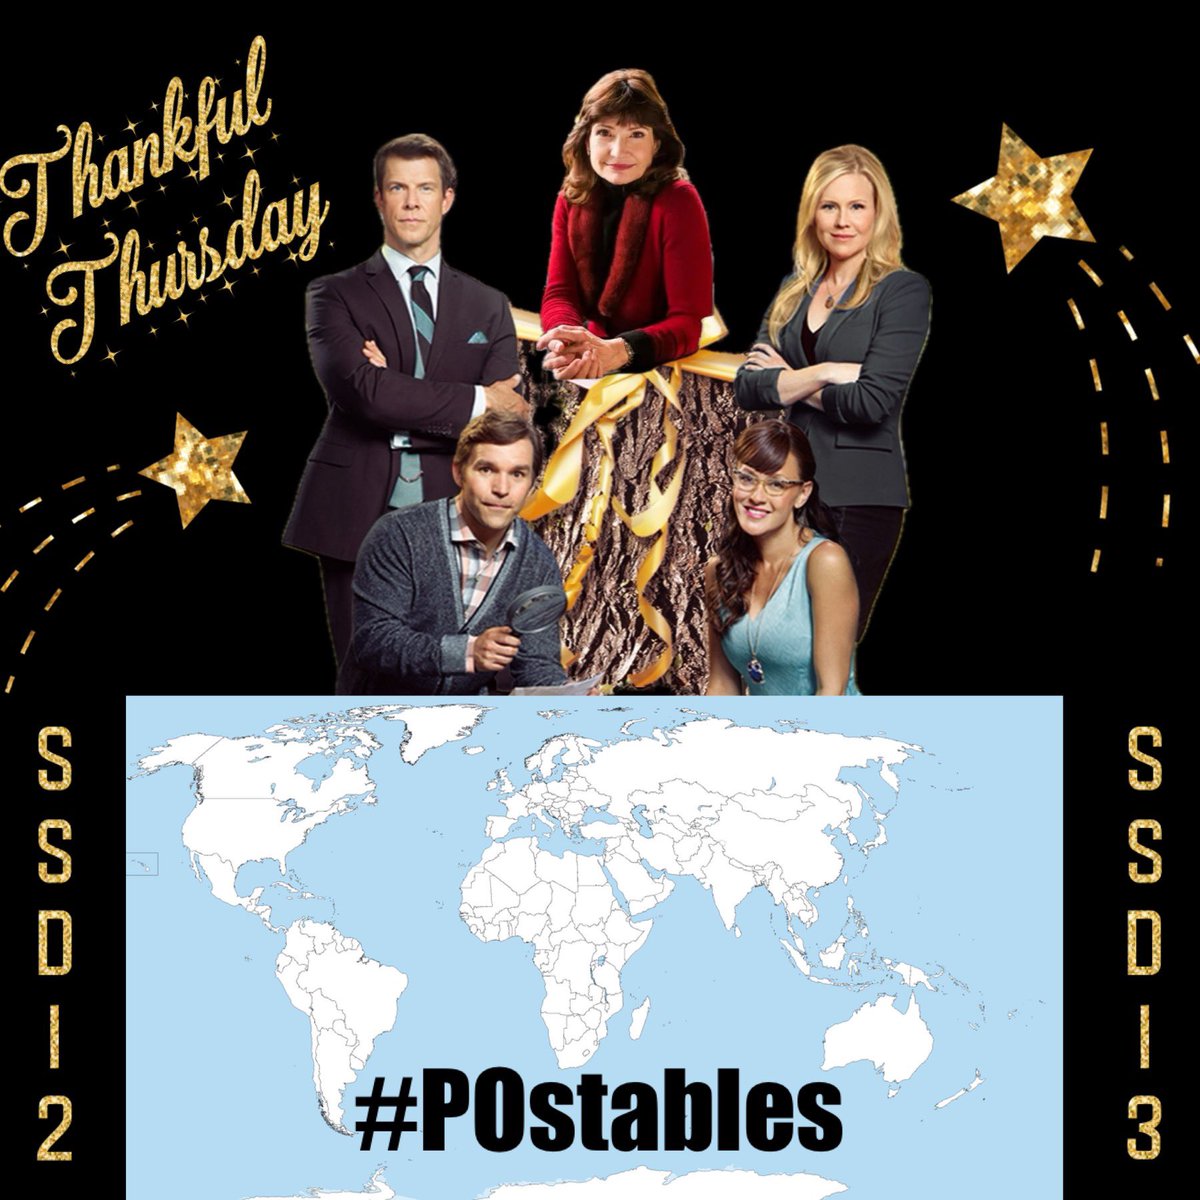 Today is a day to be Thankful💙 #ThankfulThursday Thankful for @MarthaMoonWater the brilliant creator of #SSD 💙 Thankful for the cast💙 @Eric_Mabius @kristintbooth @RealCrystalLowe @geoffgustafson Thankful for the #POstables from all over the world💙 #LisaHamiltonDaly